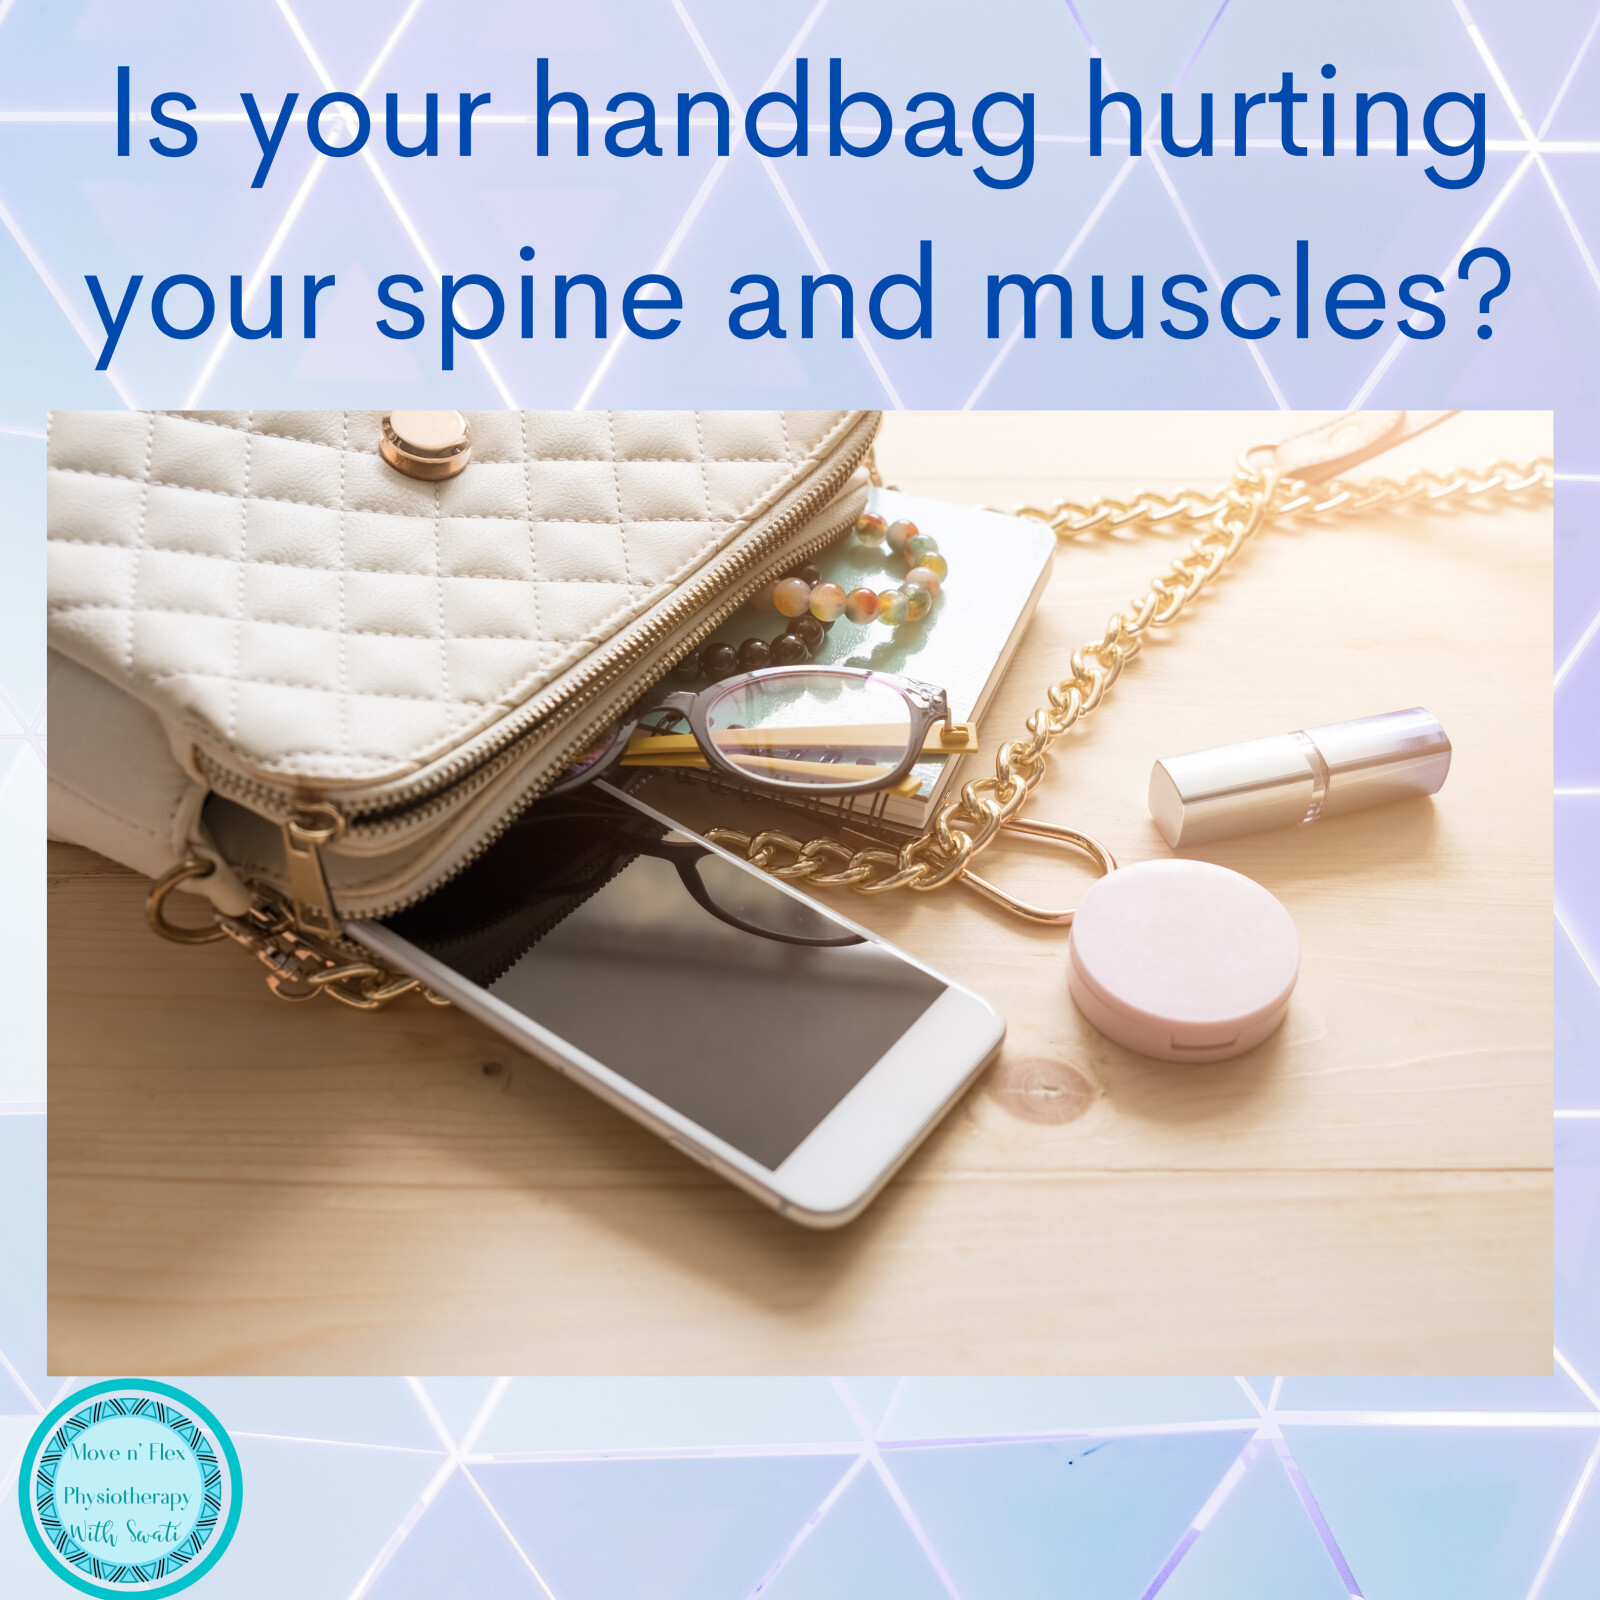 Easy tips to ensure that your handbag is not hurting your spine and muscles